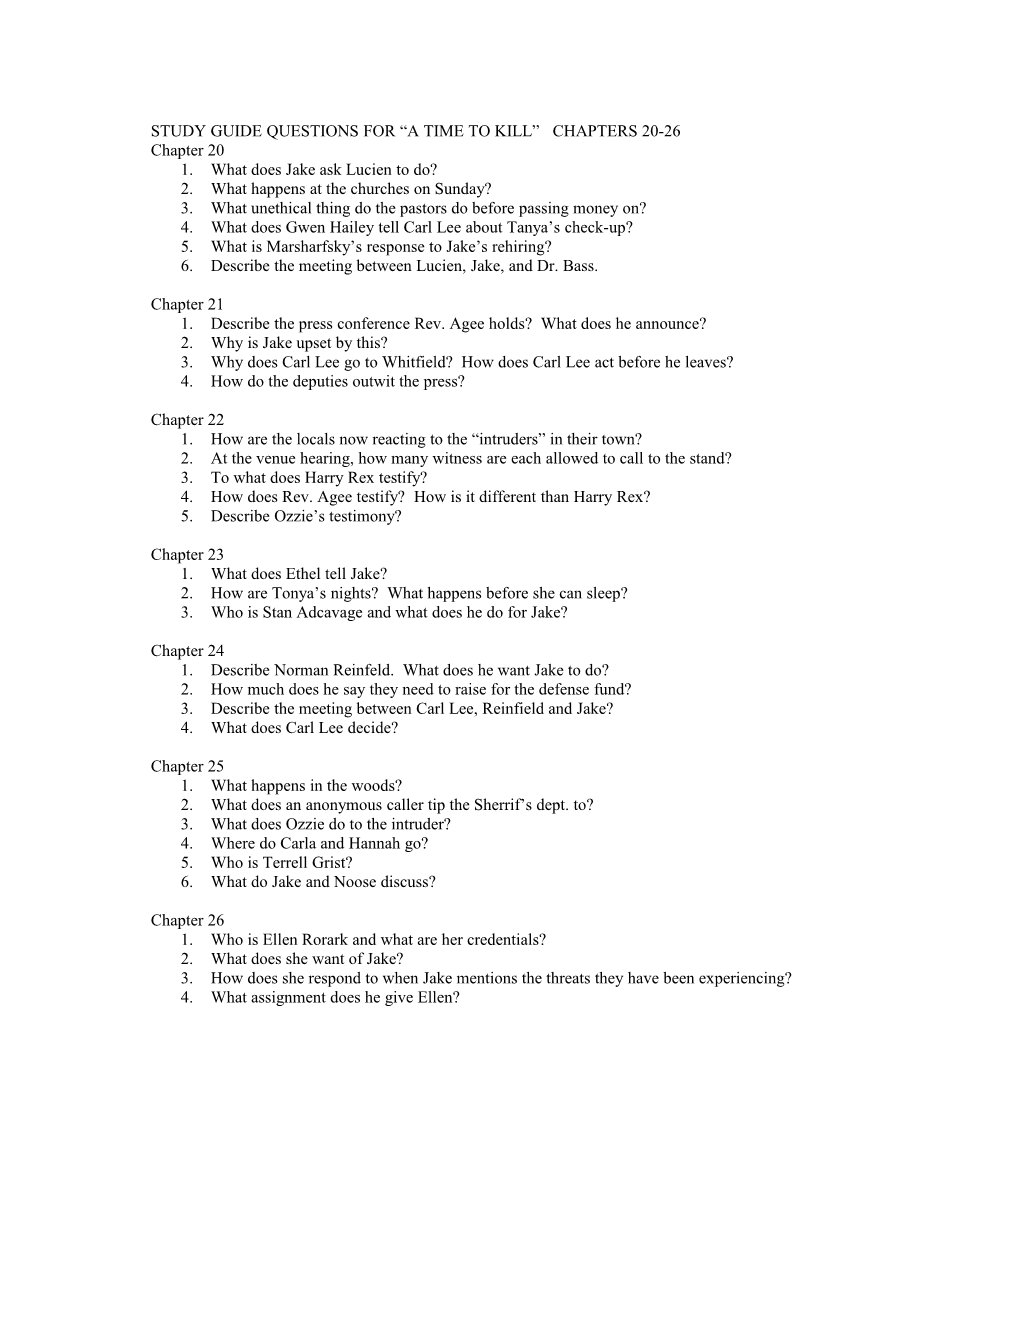 Study Guide Questions for a Time to Kill Chapters 20-26